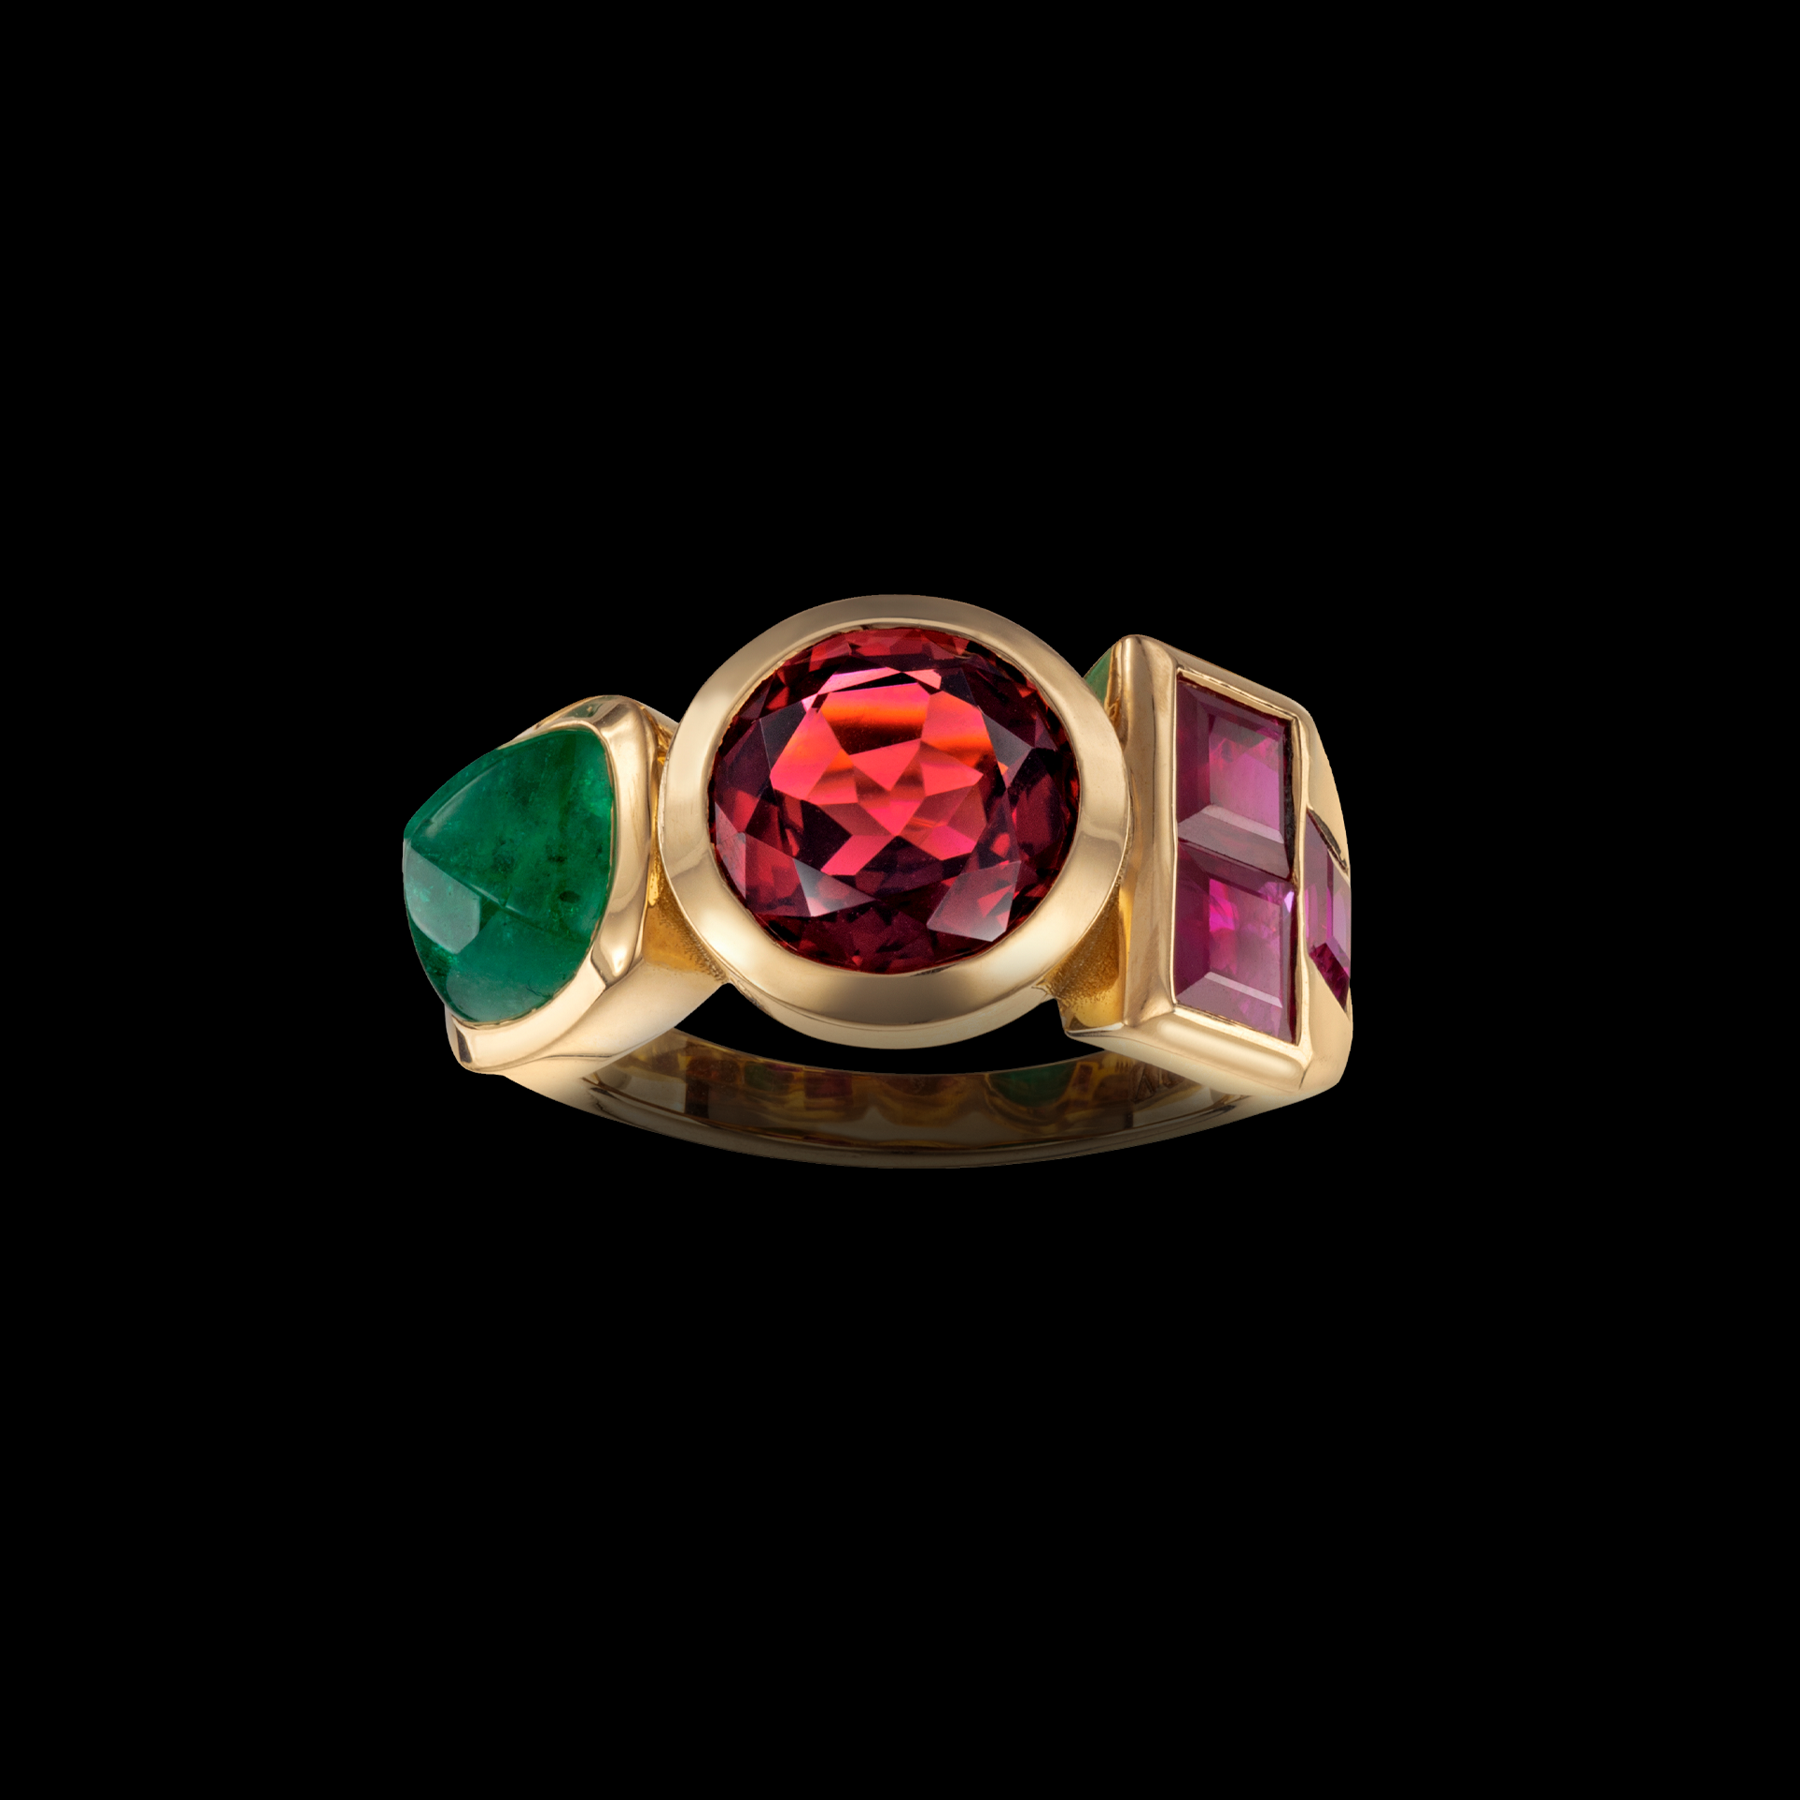 Edible ring by designer Solange Azagury-Partridge - 18k Yellow Gold, Pink Tourmaline - front view